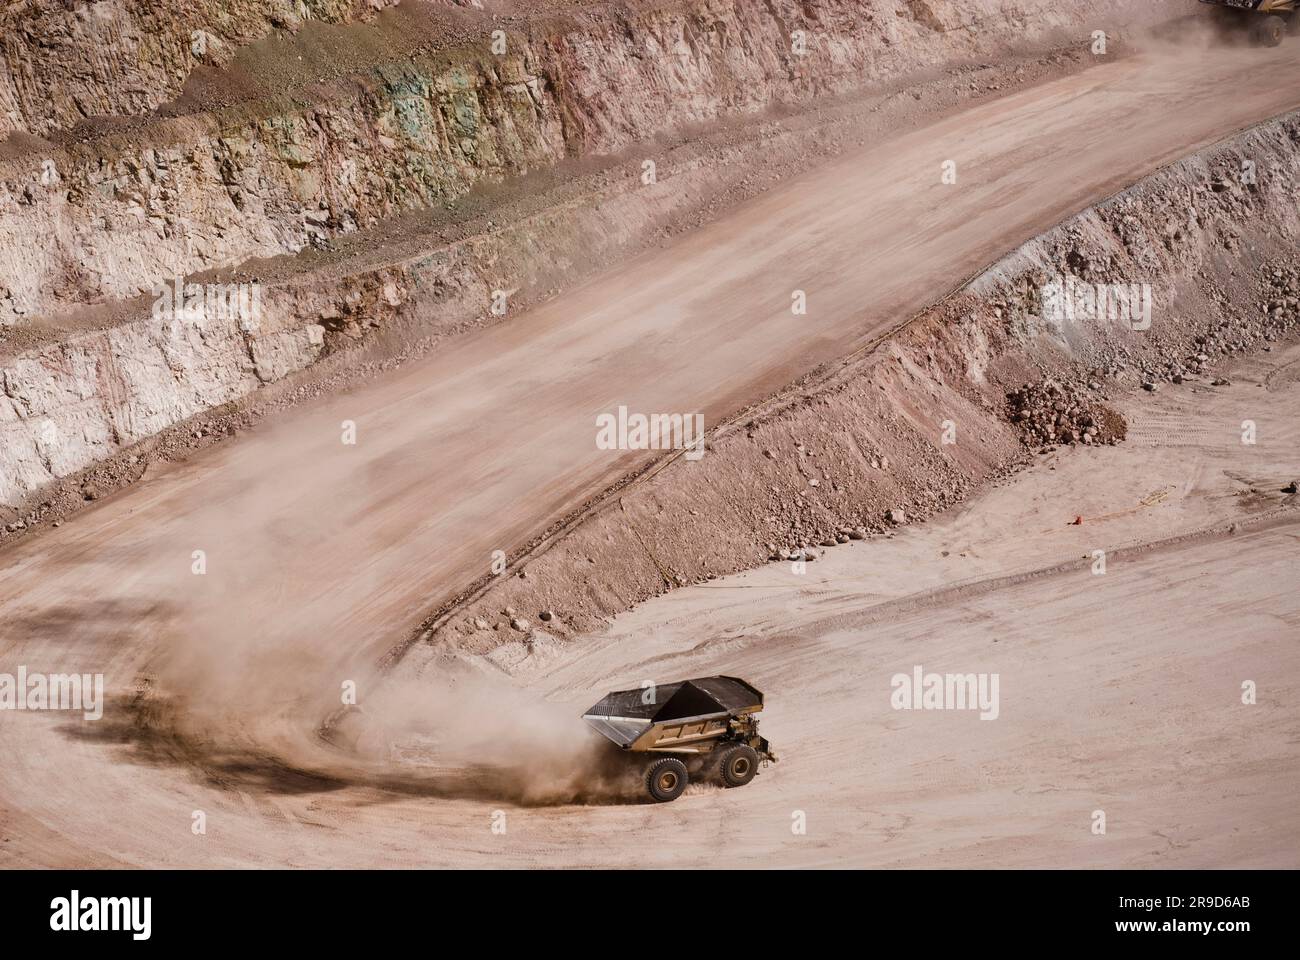 Empty haul truck at bottom of open-pit mine Stock Photo